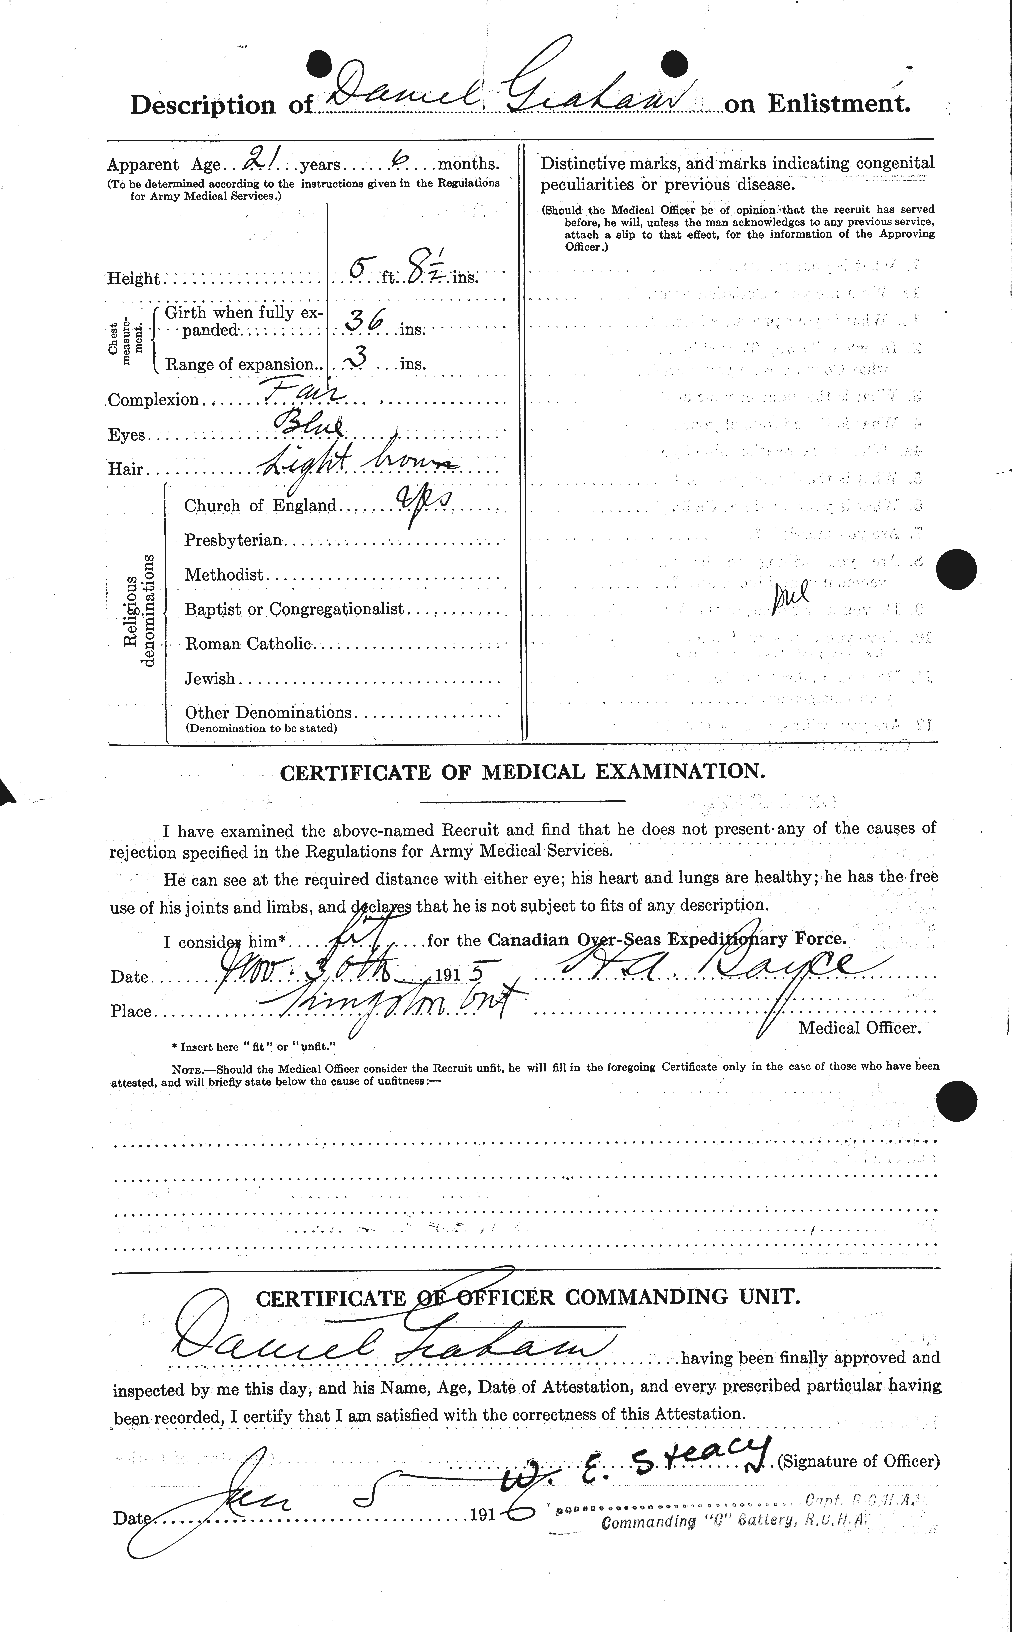 Personnel Records of the First World War - CEF 353809b